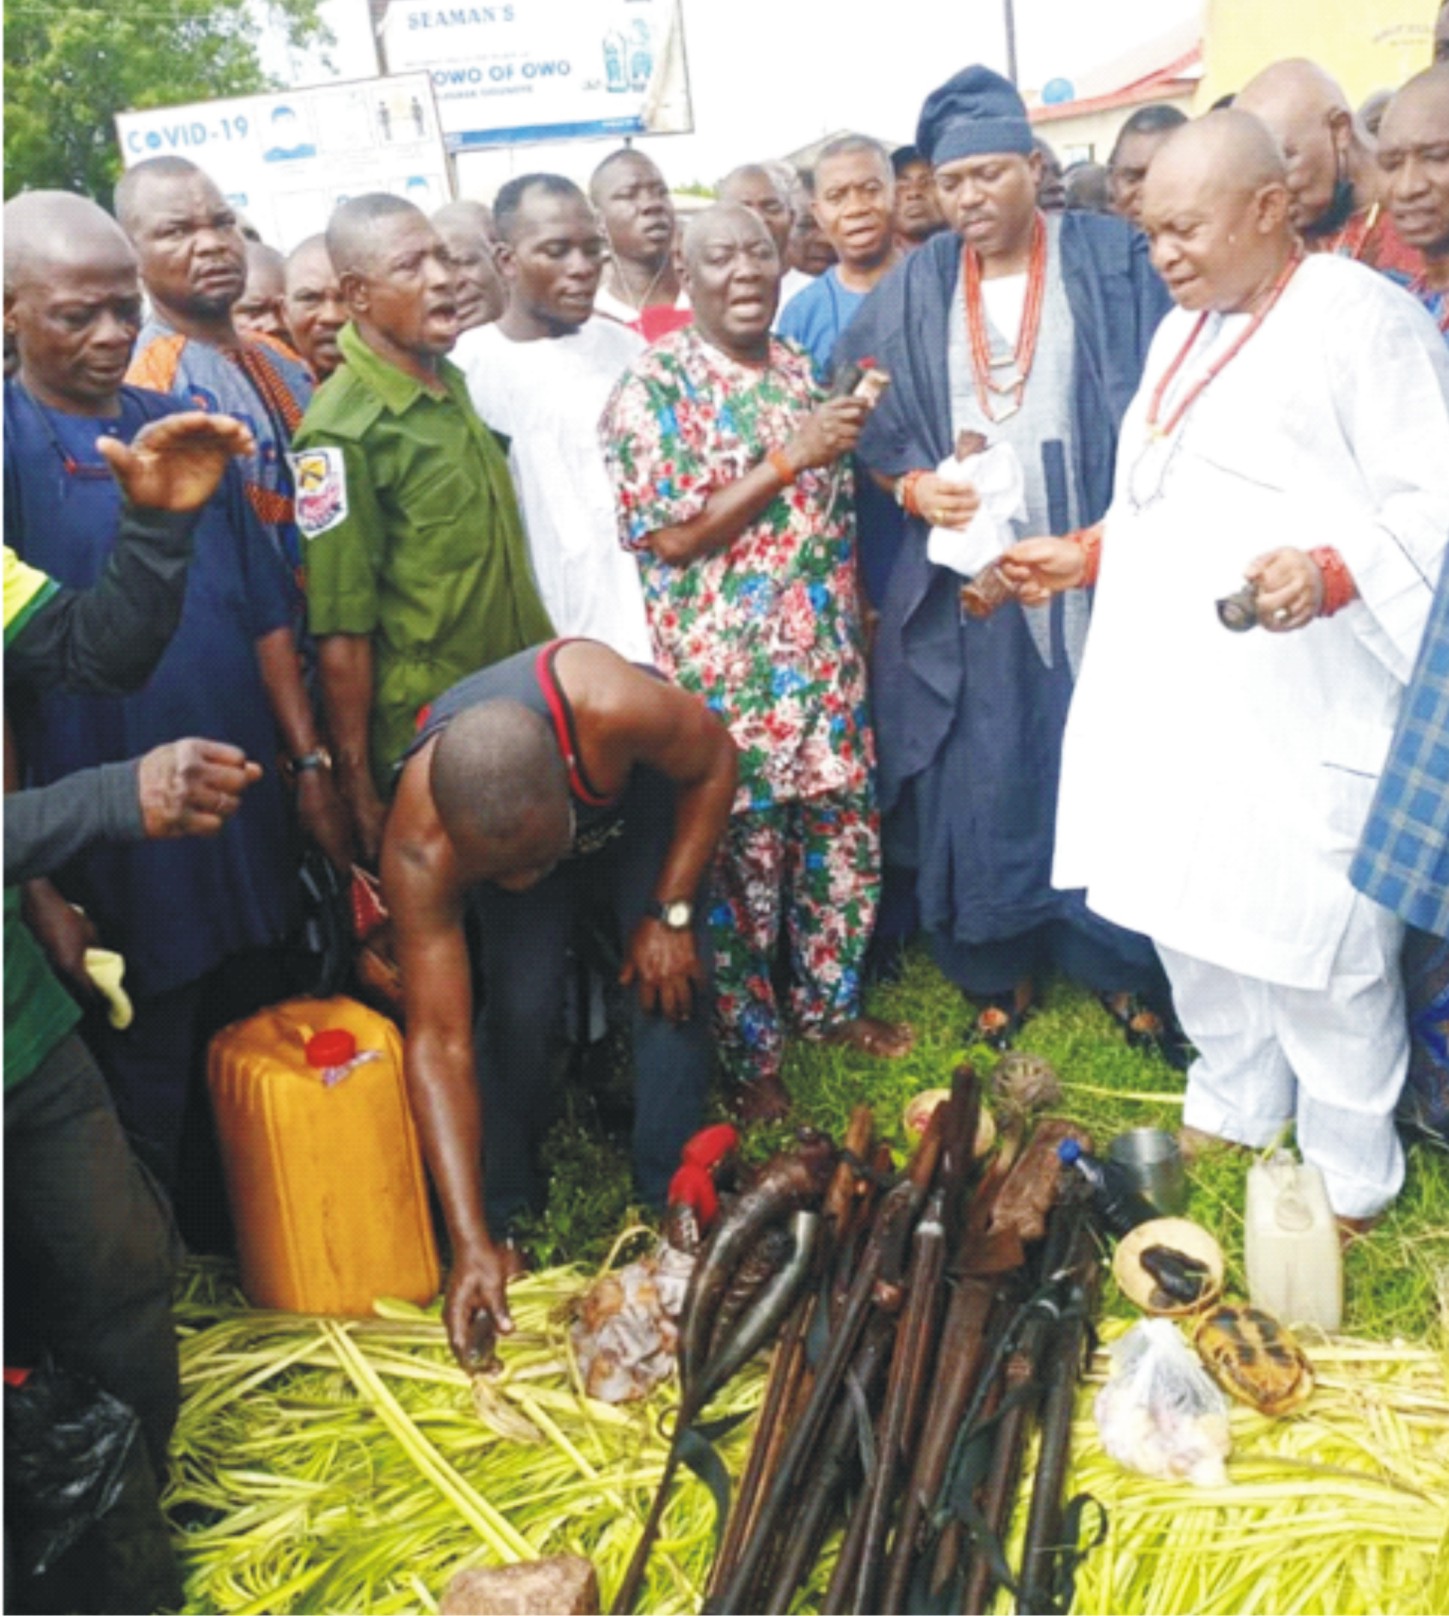 Olowo of Owo, Oba Ajibade Ogunoye (M), assisted by the Olu-Ode of Owo, Chief Aderobagun perform special rites and curses on terrorists who wreaked havoc on  worshippers in the ancient town two weeks ago